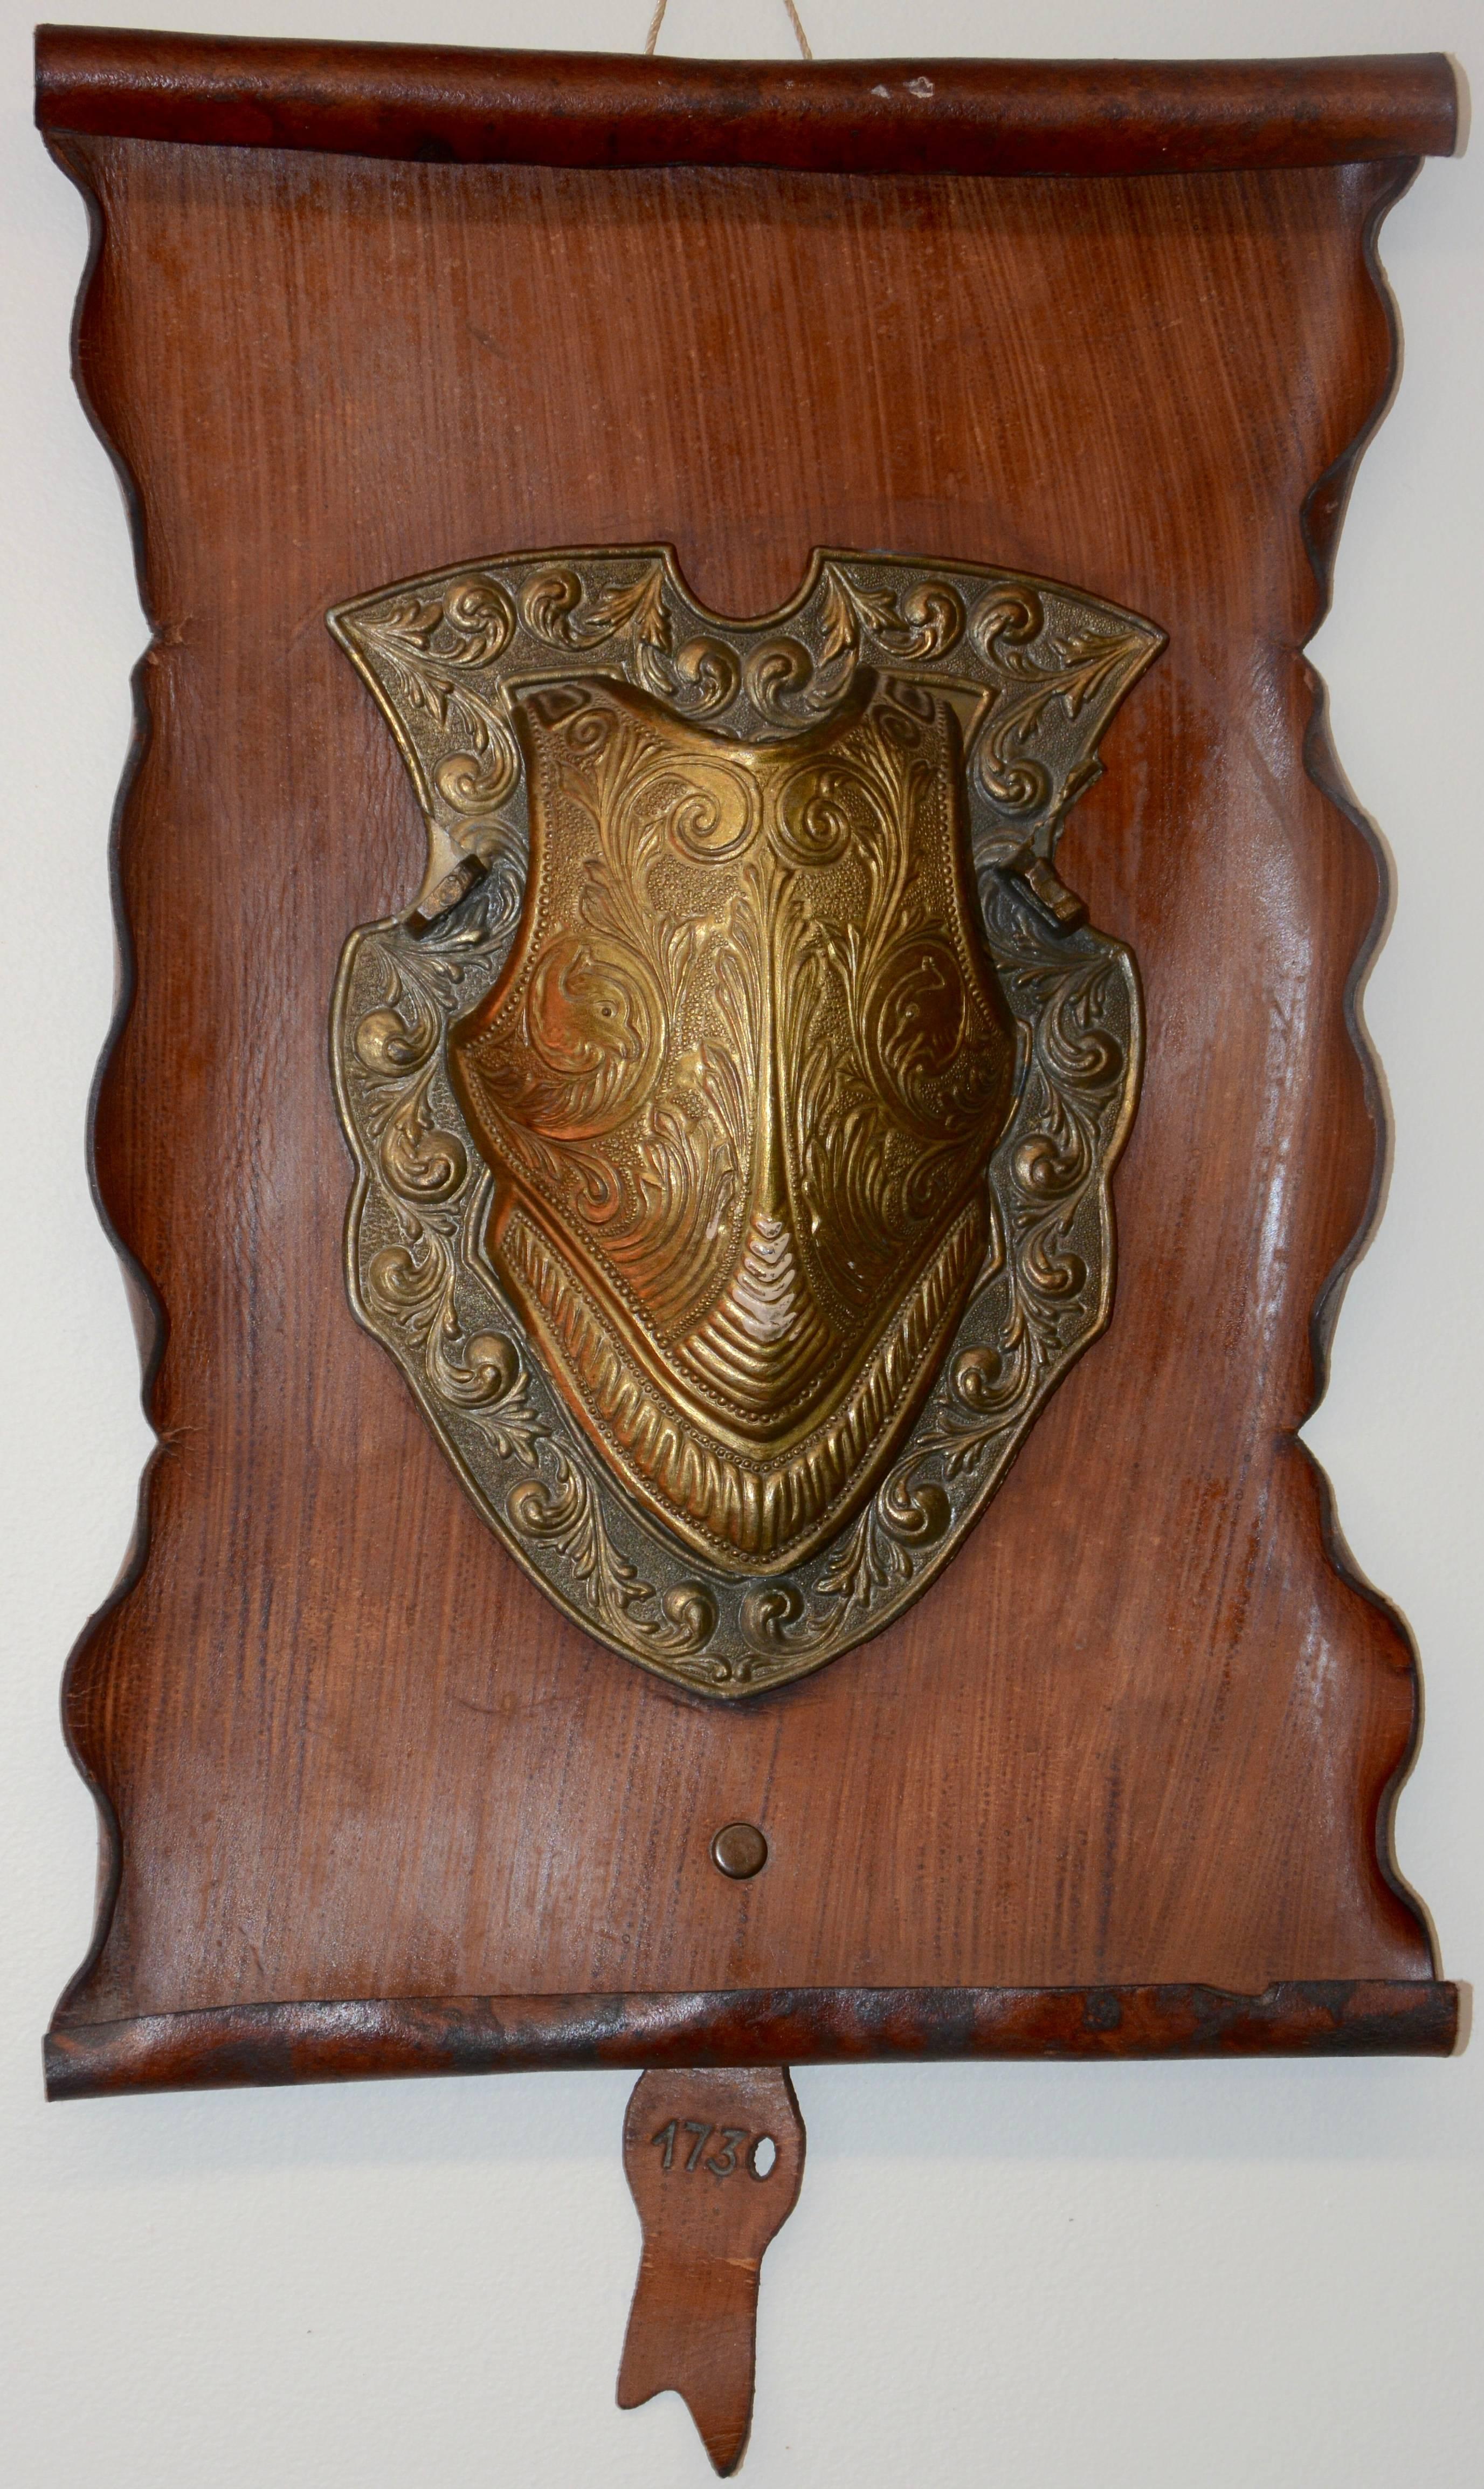 We are offering a vintage reproduction of a bronze shield mounted on a rustic leather scroll. The leather has rolled edges top and bottom and the sides are cut and folded. There is a leather tab on the bottom date 1730 which is most likely the date